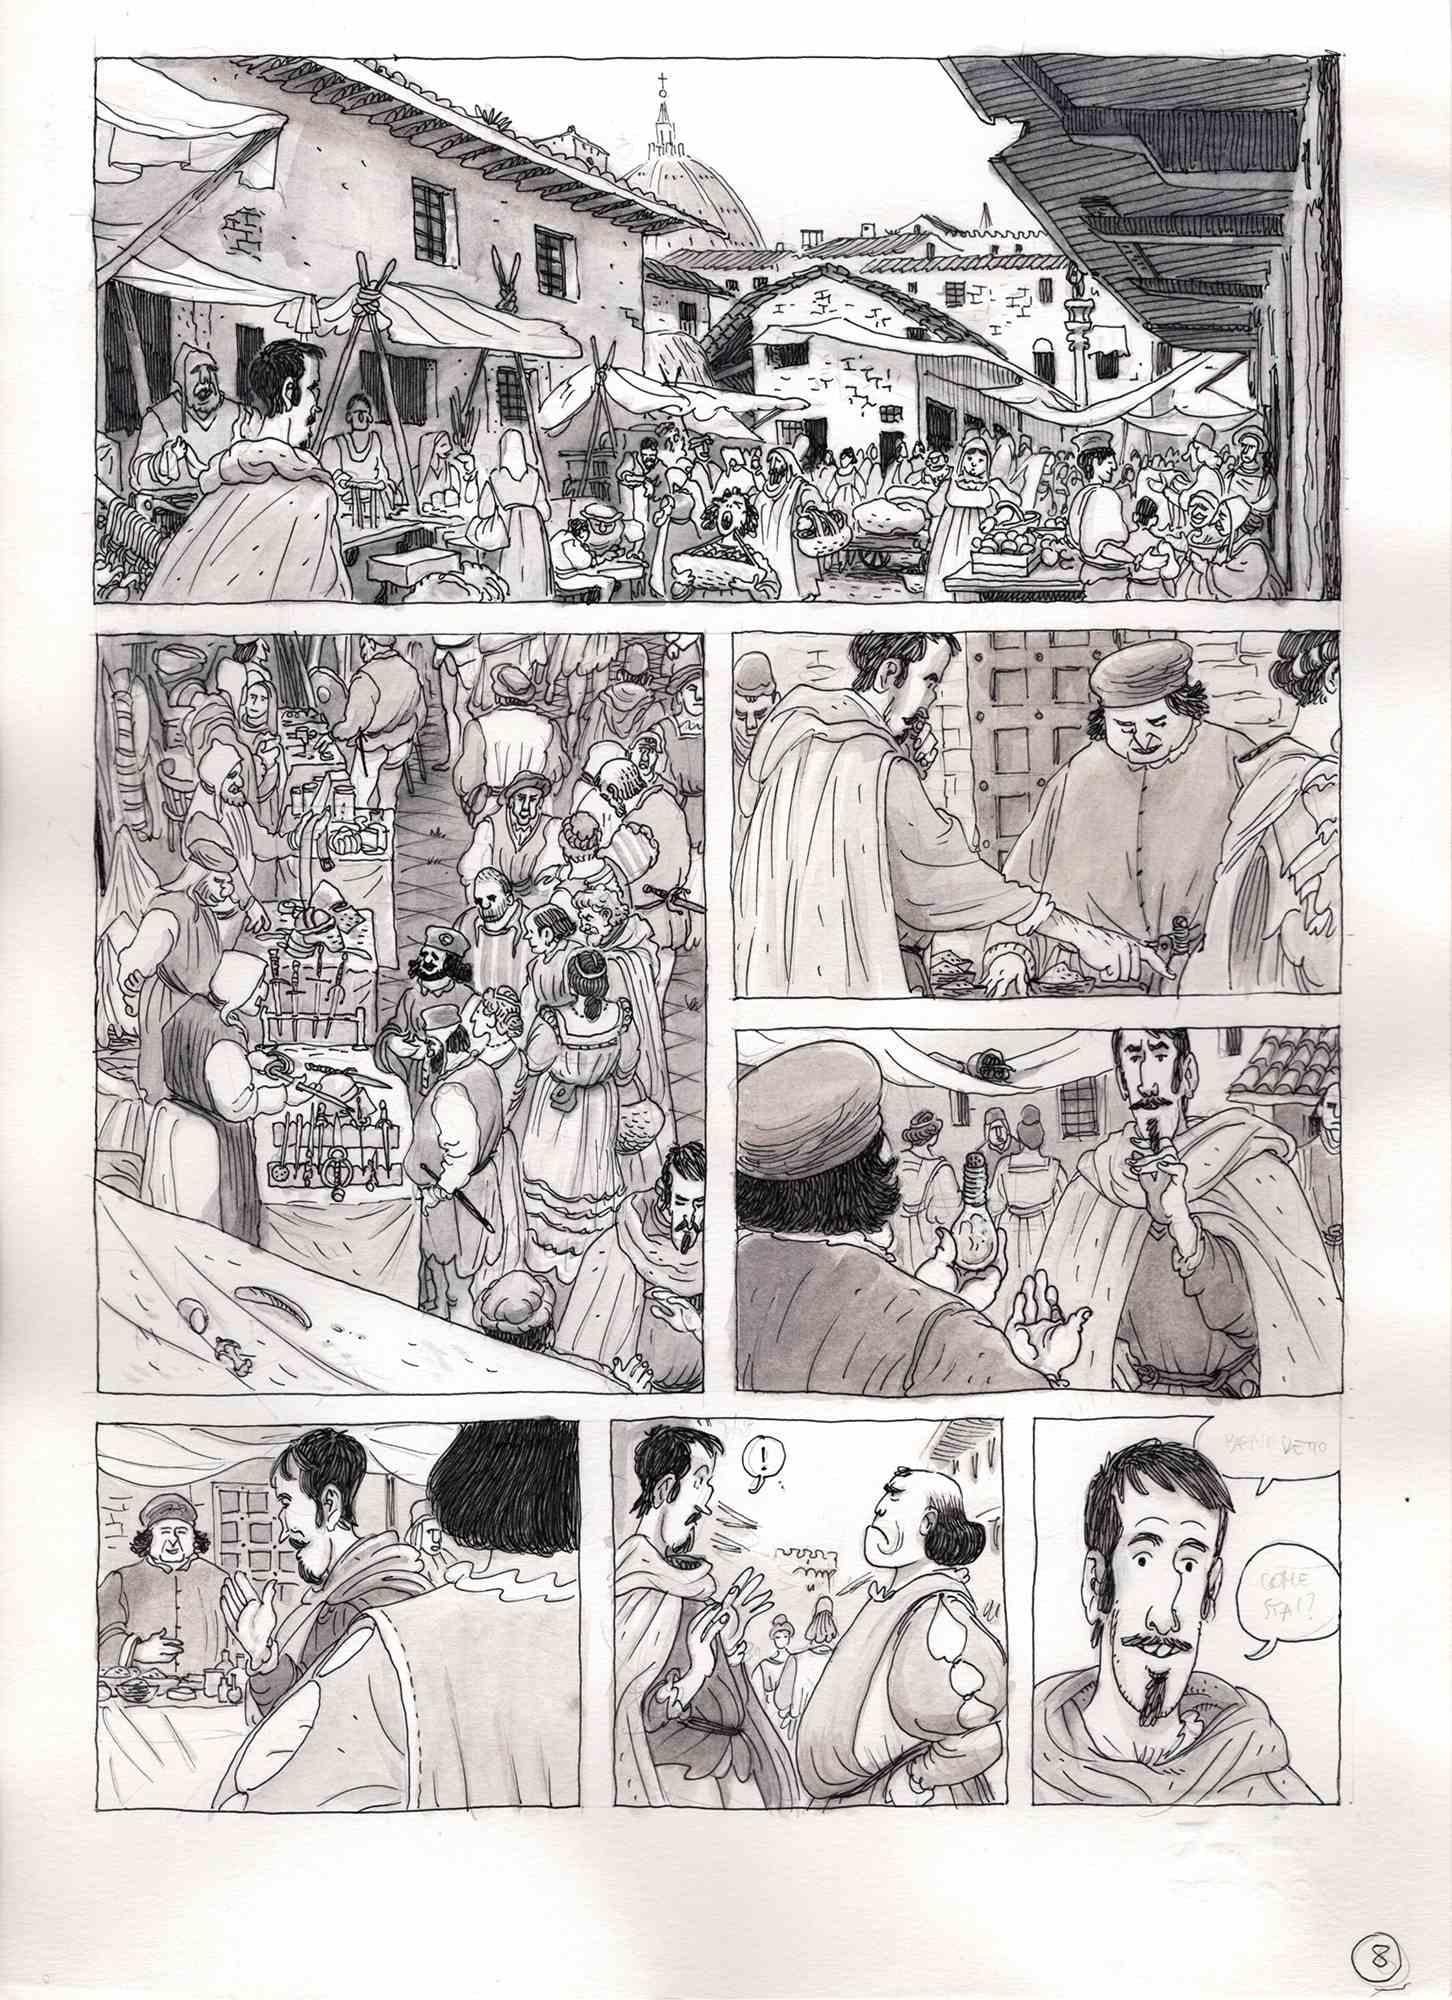 This work entitled "Market day in Florence" is a table of the graphic novel published in 2016 by Kleiner Flug in Italy "Benvenuto Cellini". The work was done by Vincenzo Bizzarri in 2015 with ink and watercolor on 200gr paper (33x24cm). The